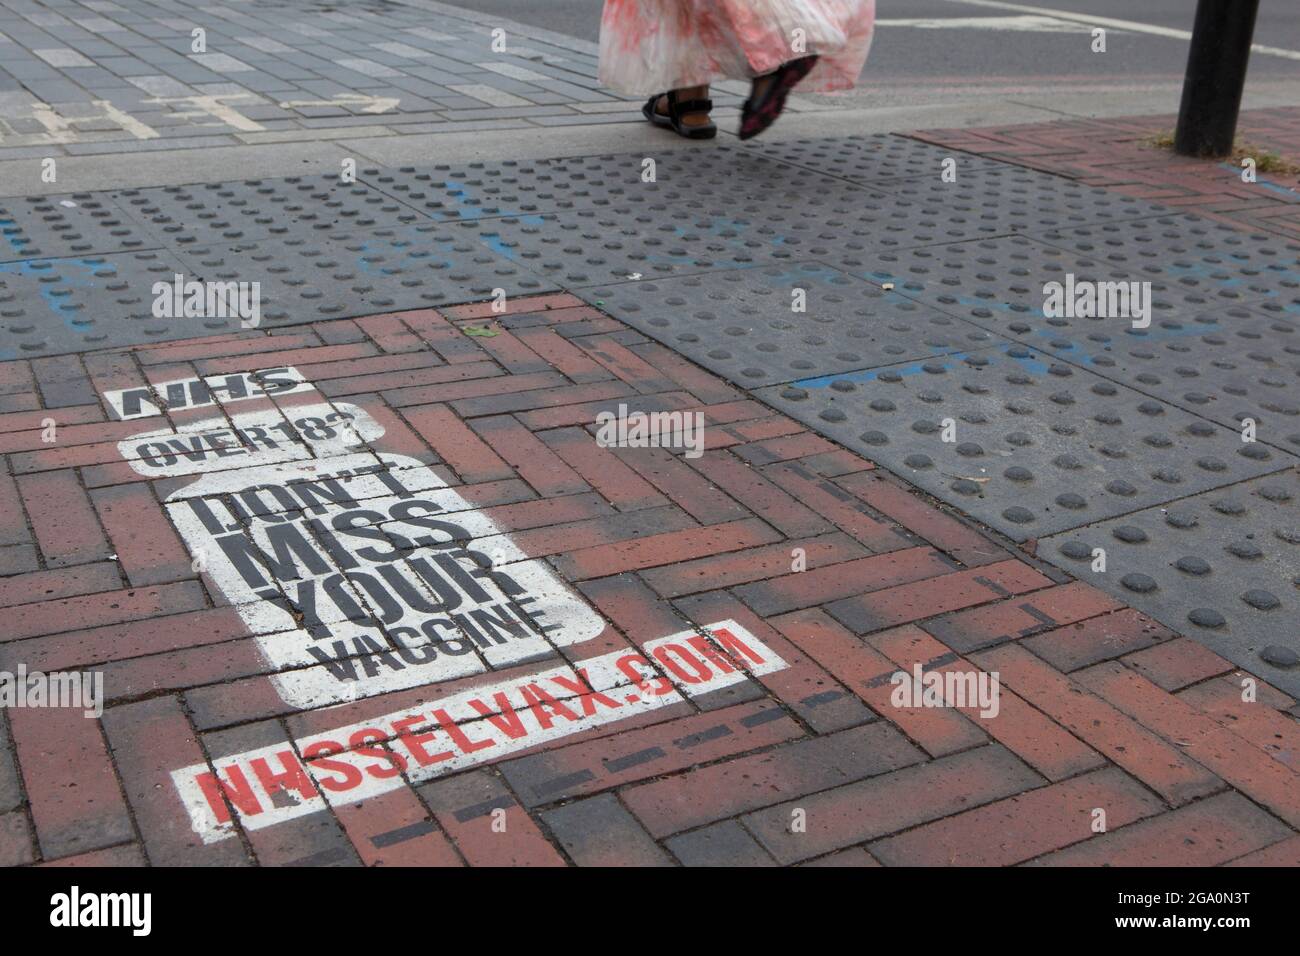 London, UK, 28 July 2021: In Windrush Square, Brixton, a painted sign on the pavement at a pedestrian crossing reminds anyone over the age of 18 that they are eligible for a coronavirus vaccination. Vaccine take-up is lower in big cities than in the rest of the country. Anna Watson/Alamy Live News Stock Photo